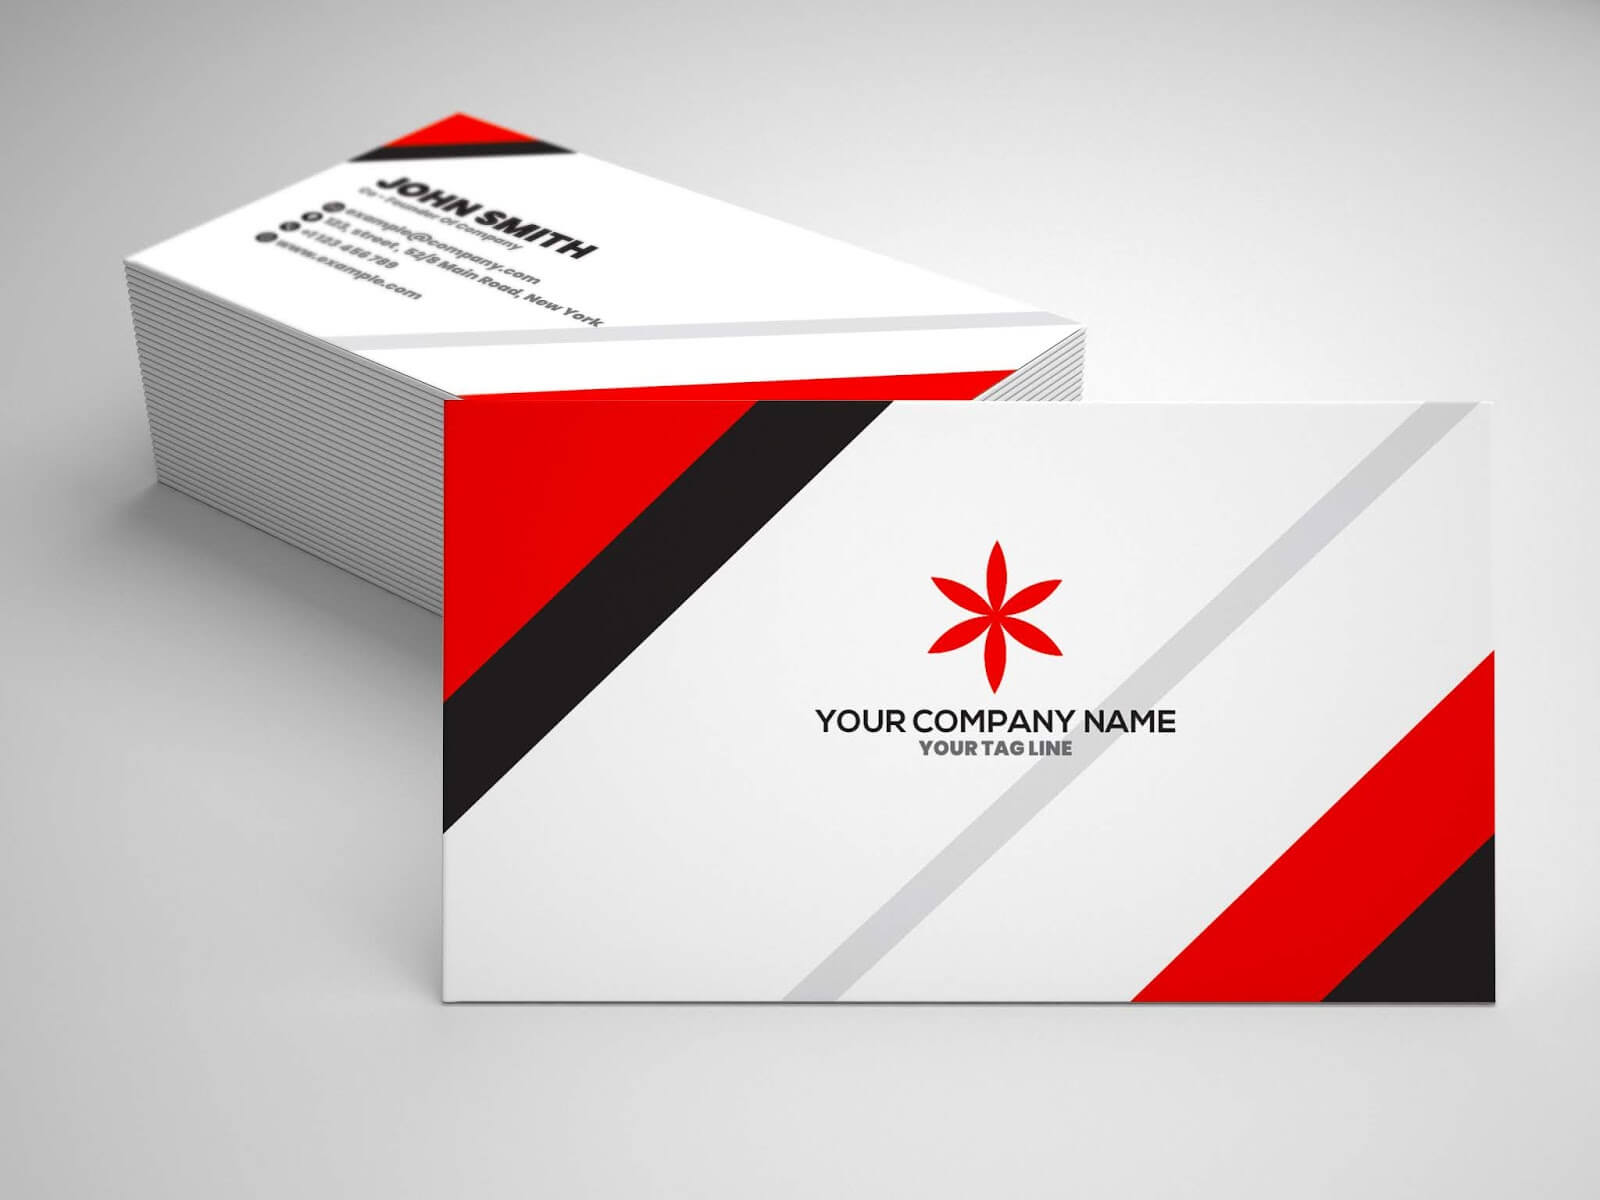 How To Make Double Sided Business Cards In Illustrator With Double Sided Business Card Template Illustrator